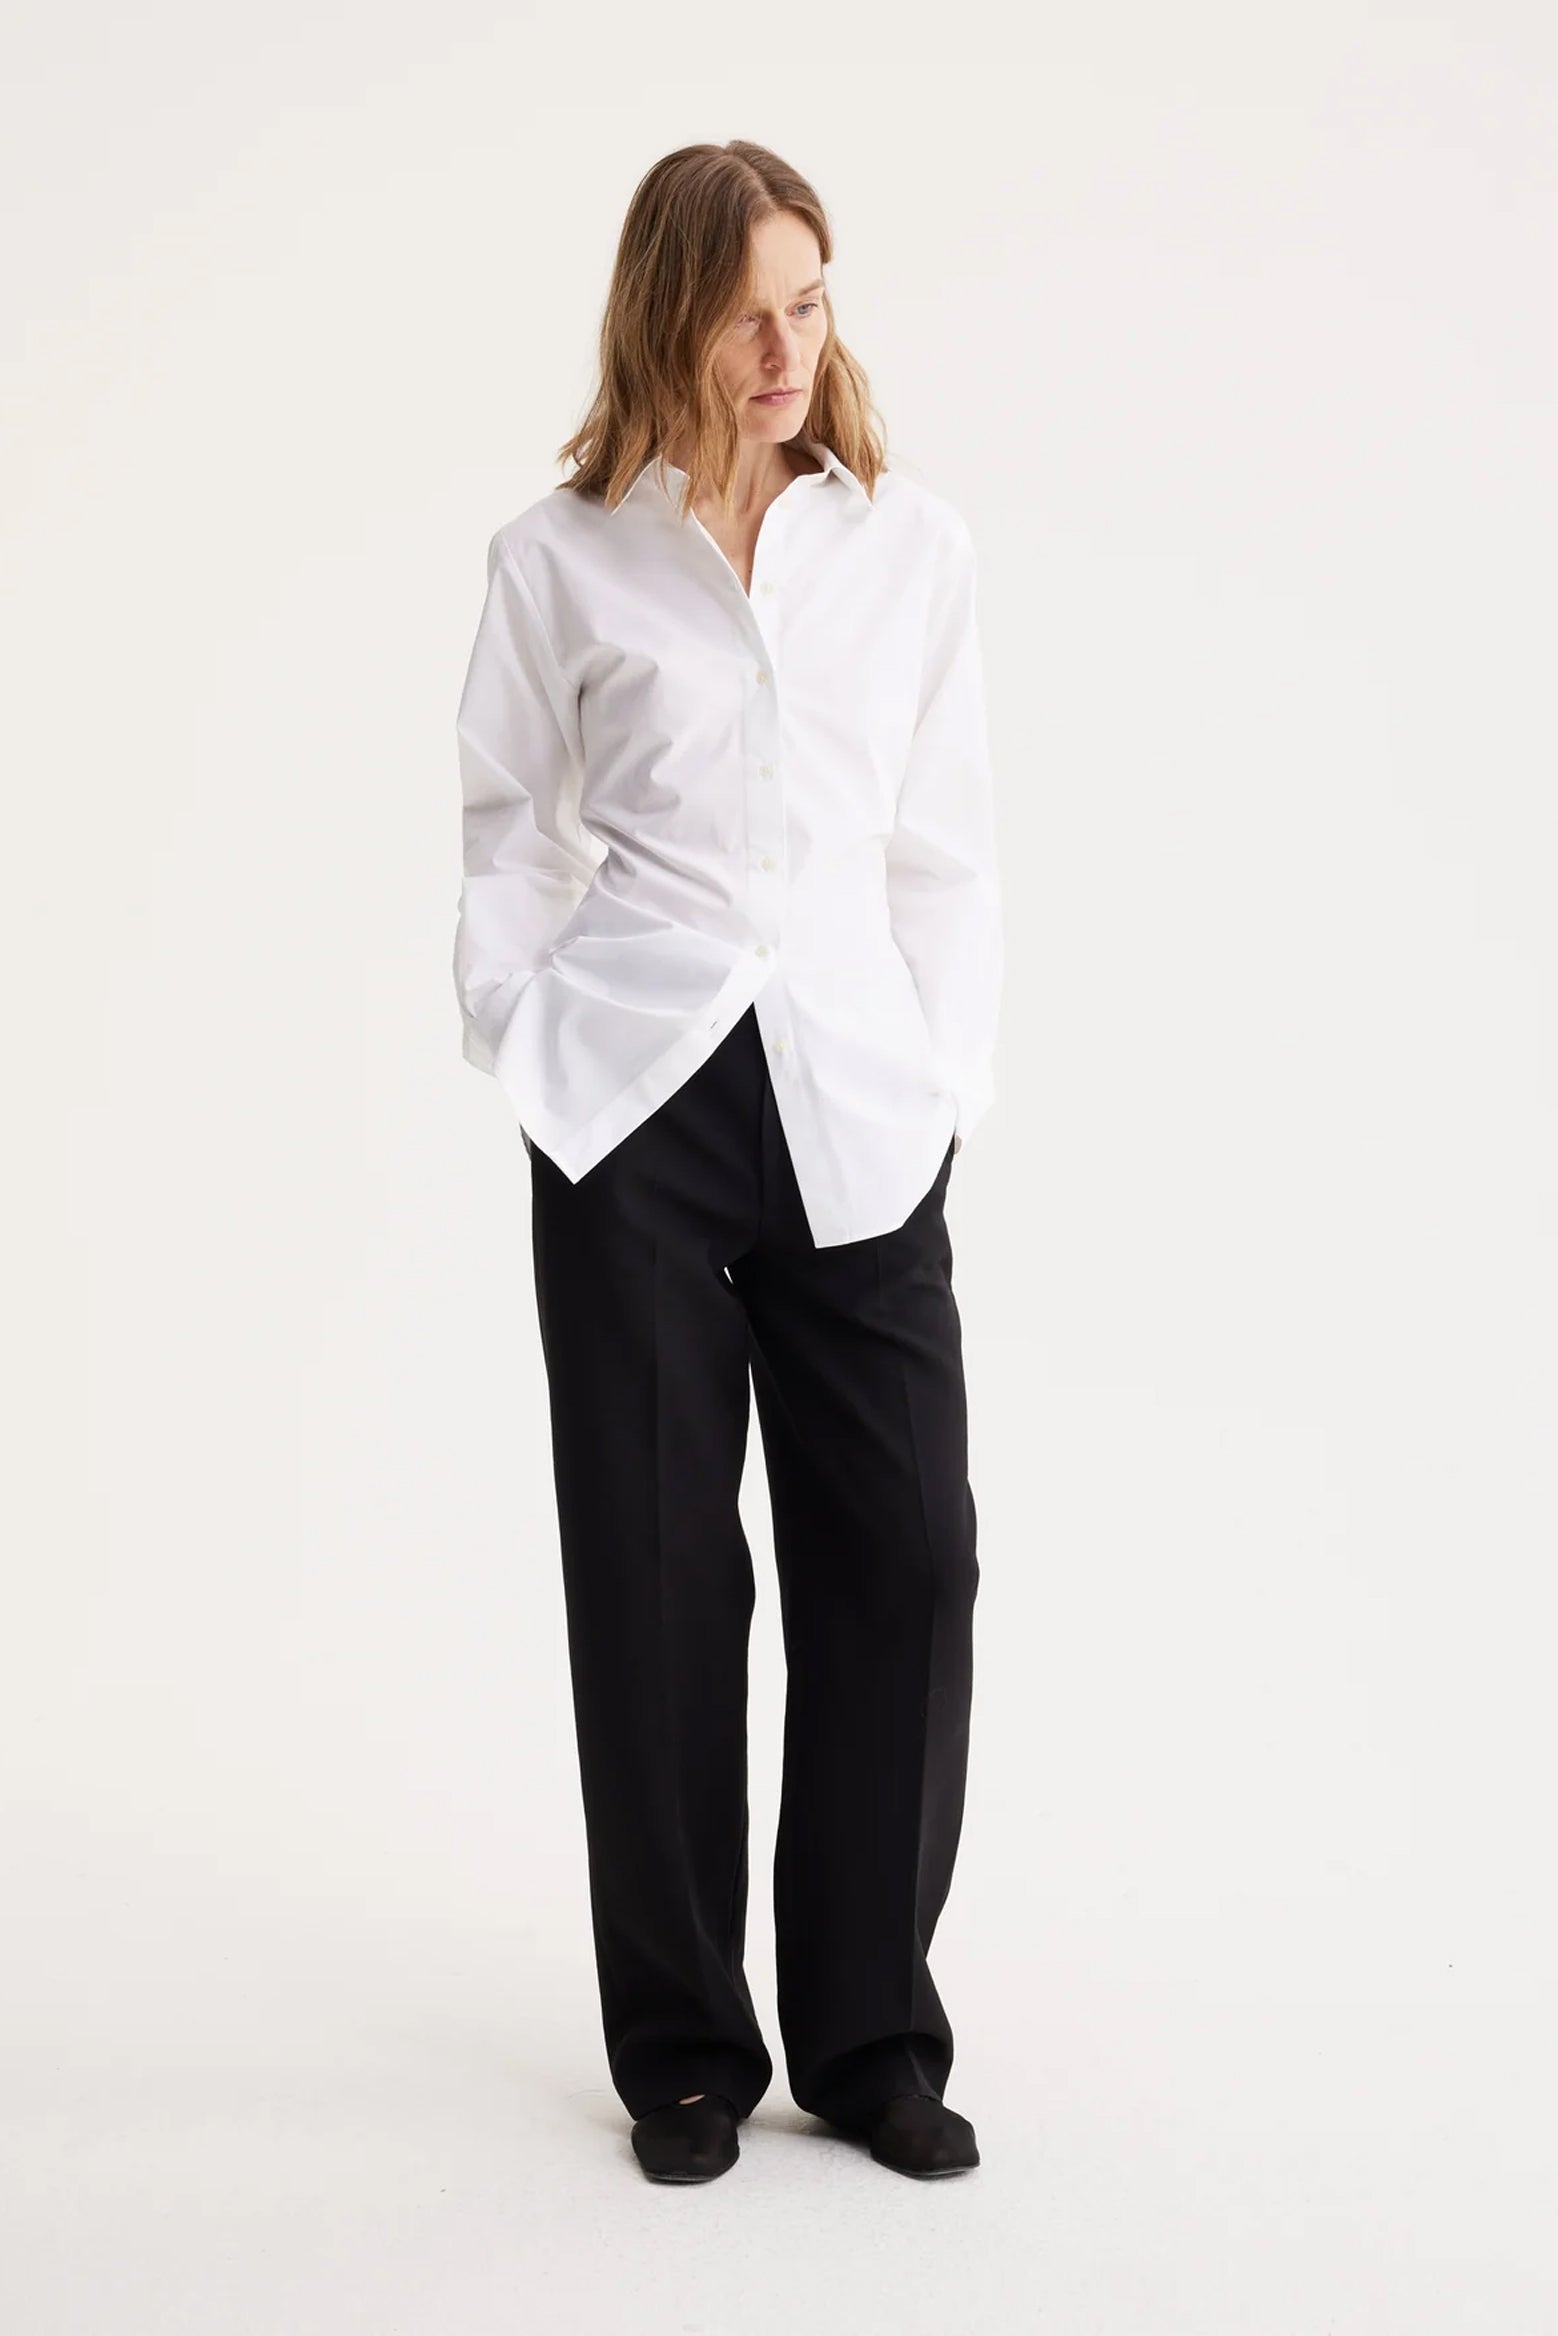 Rohe Shaped Poplin Shirt in White available at The New Trend Australia.